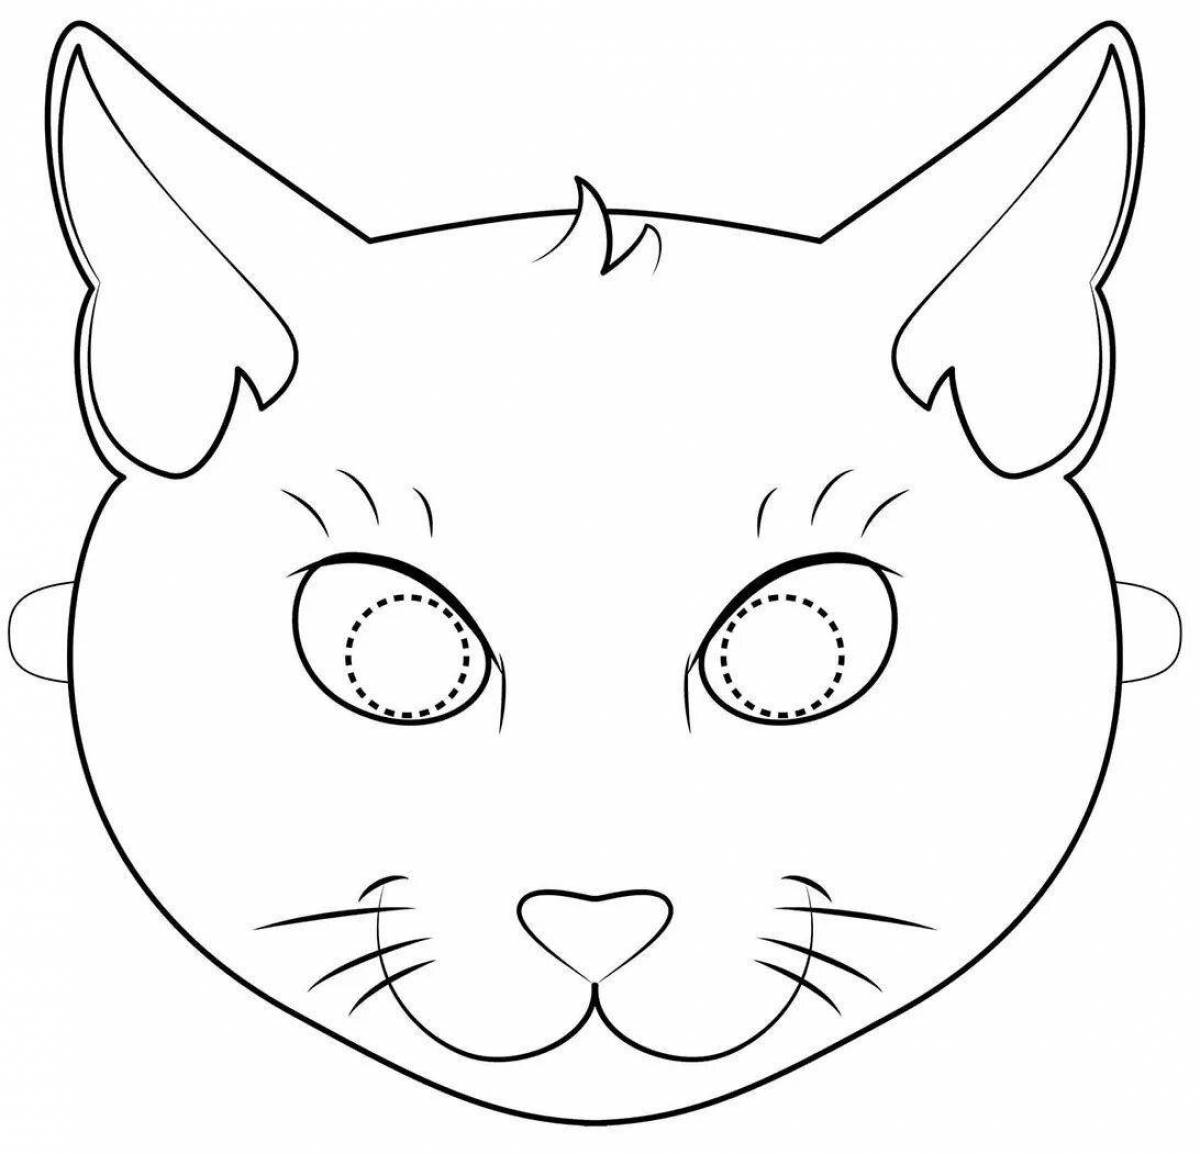 Adorable cat face coloring book